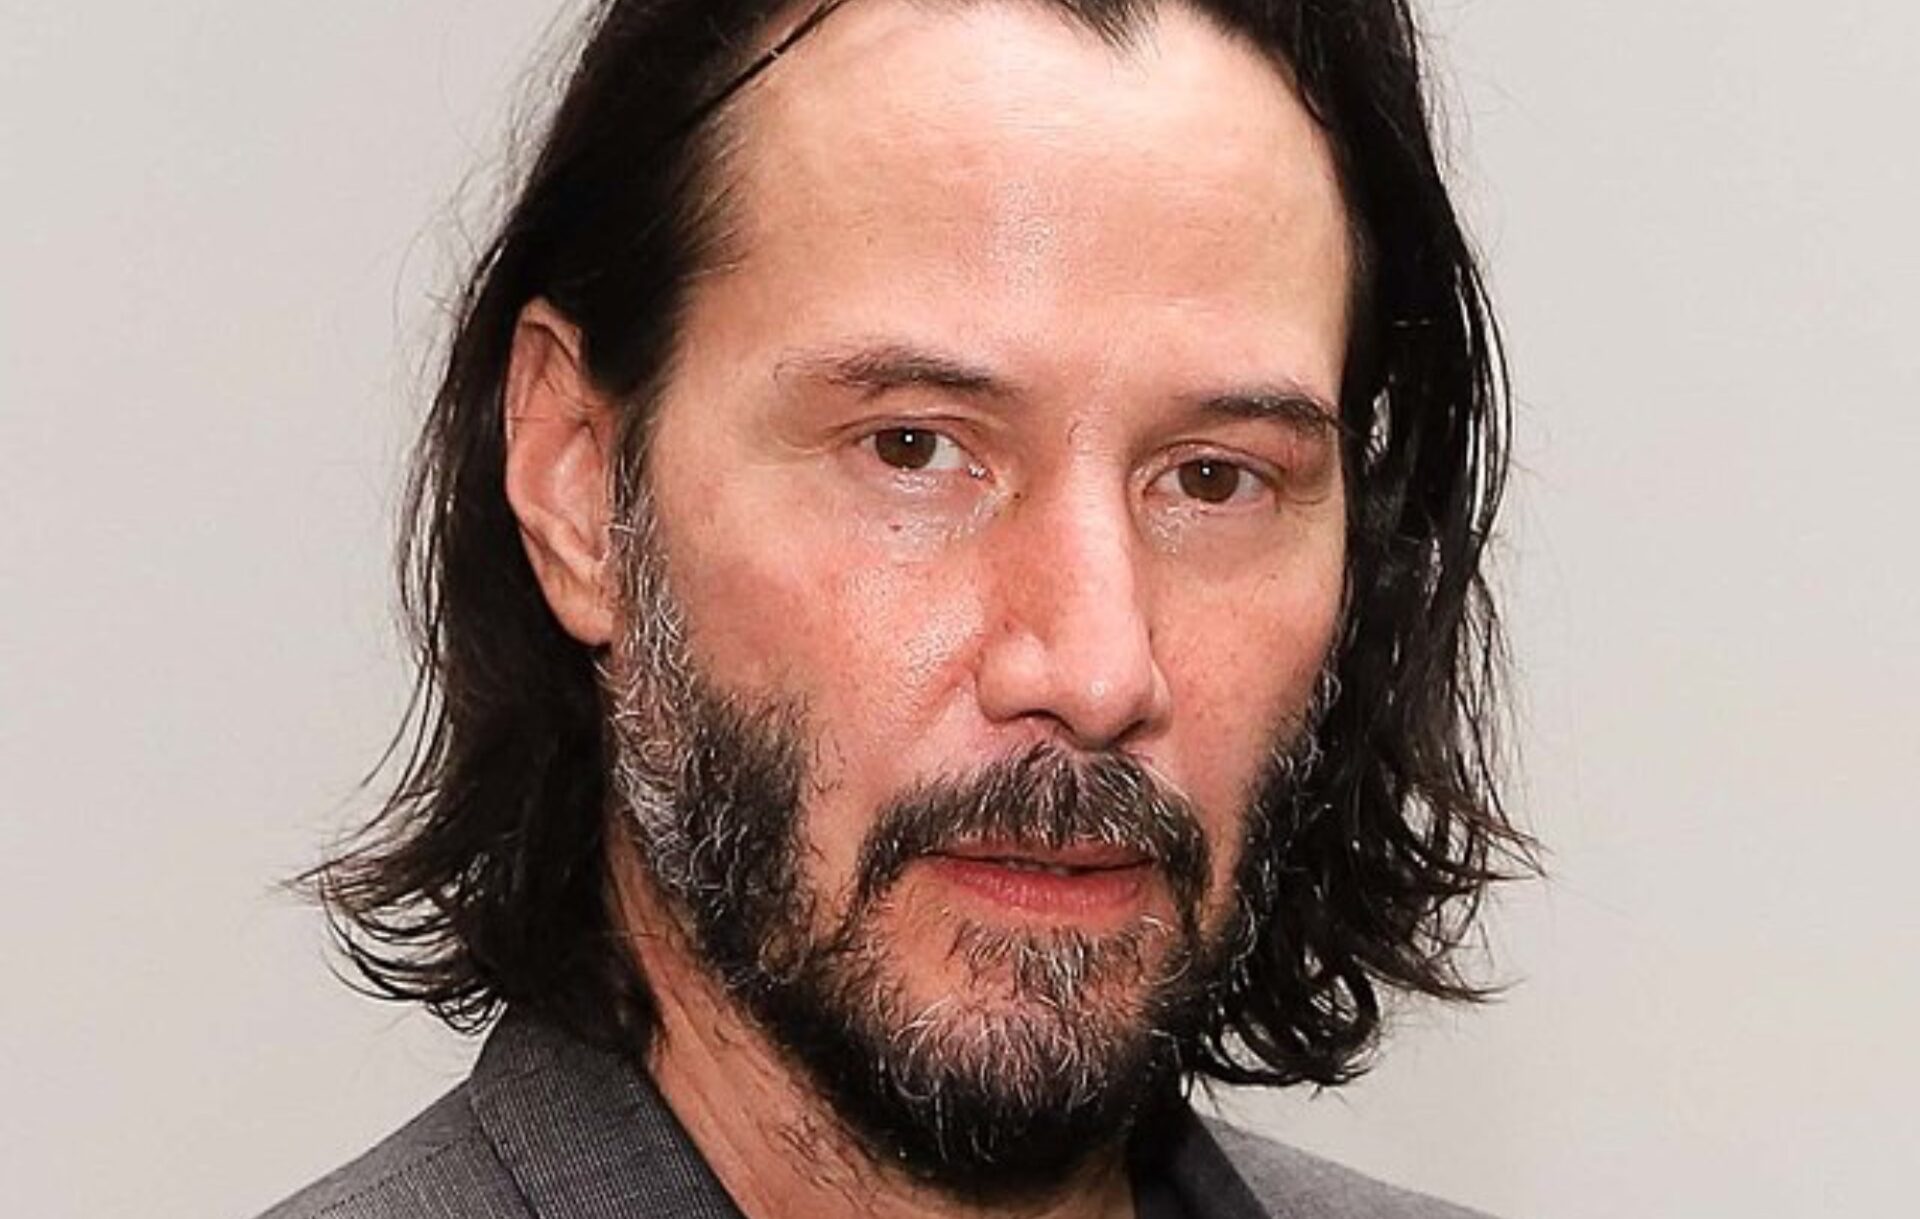 Keanu Reeves has long hair and a trimmed beard in a headshot. 